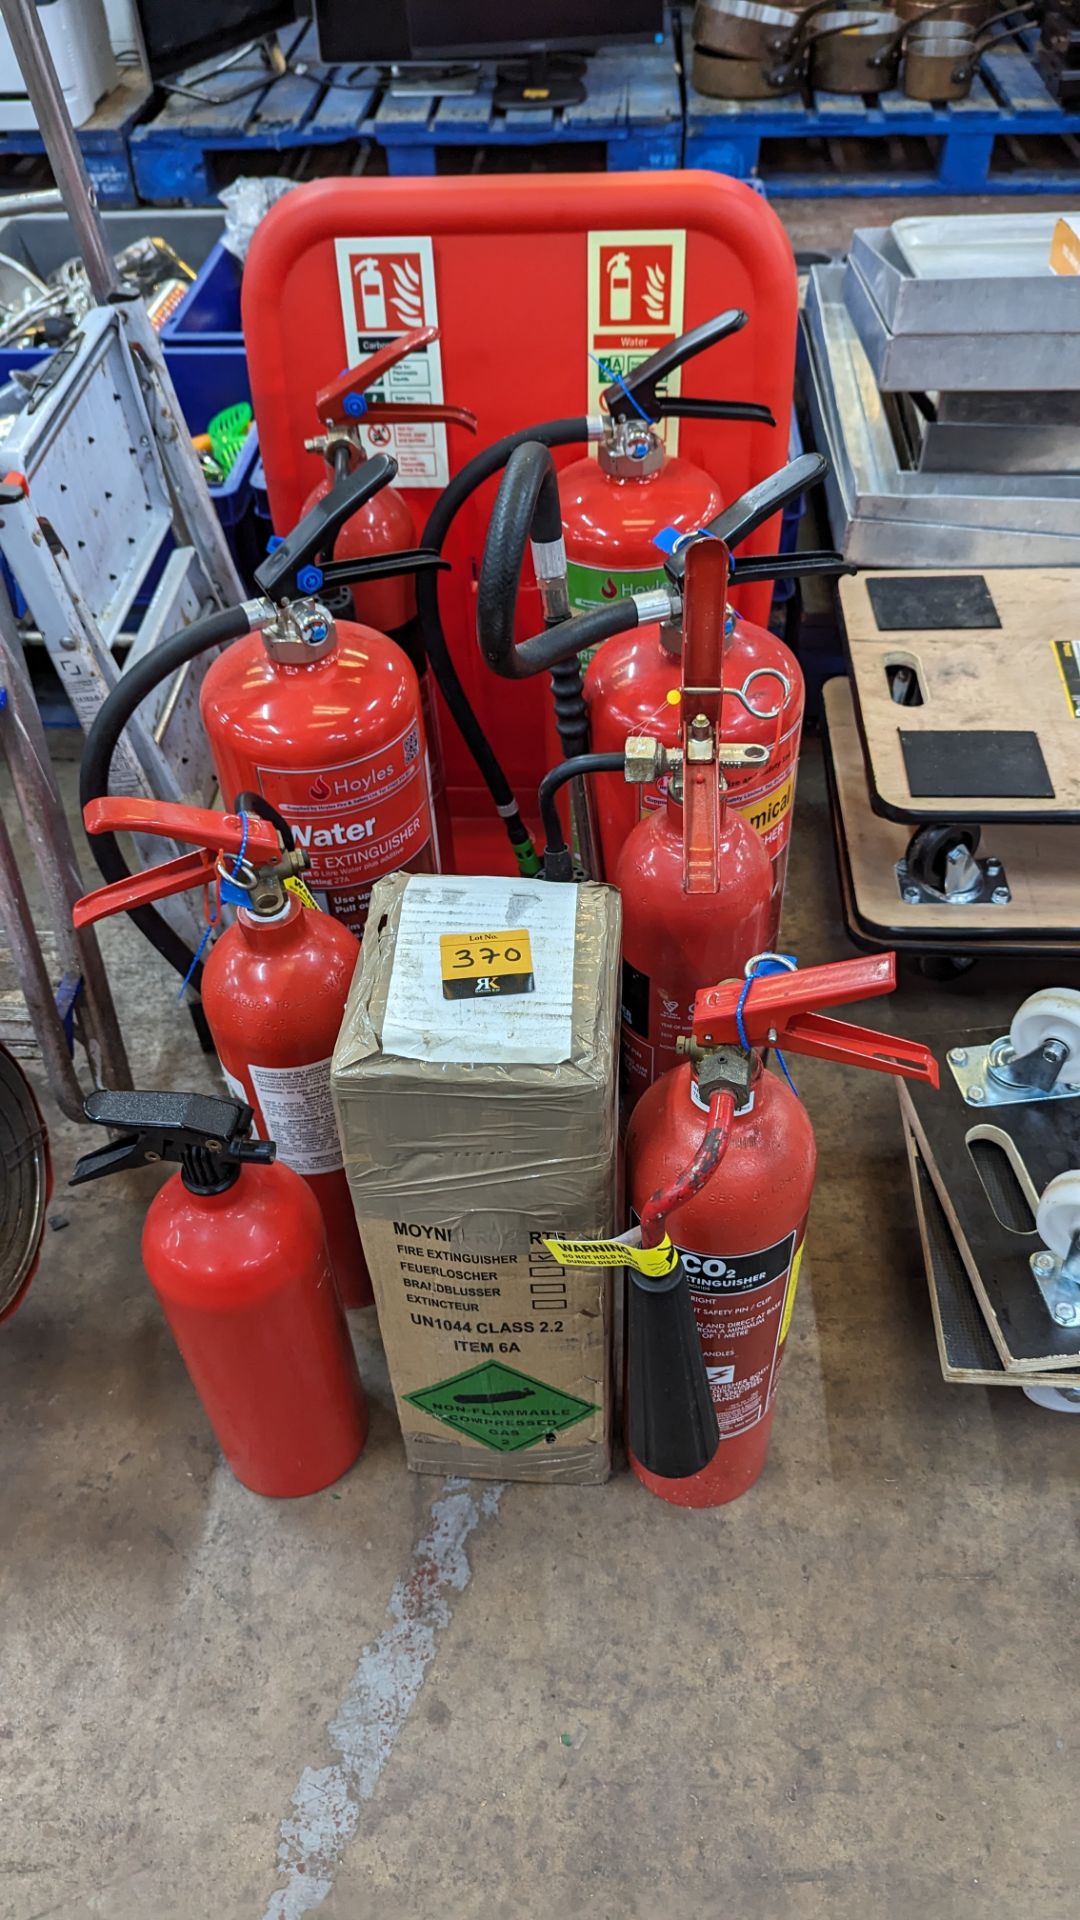 9 off fire extinguishers plus display stand for use with same - Image 2 of 6